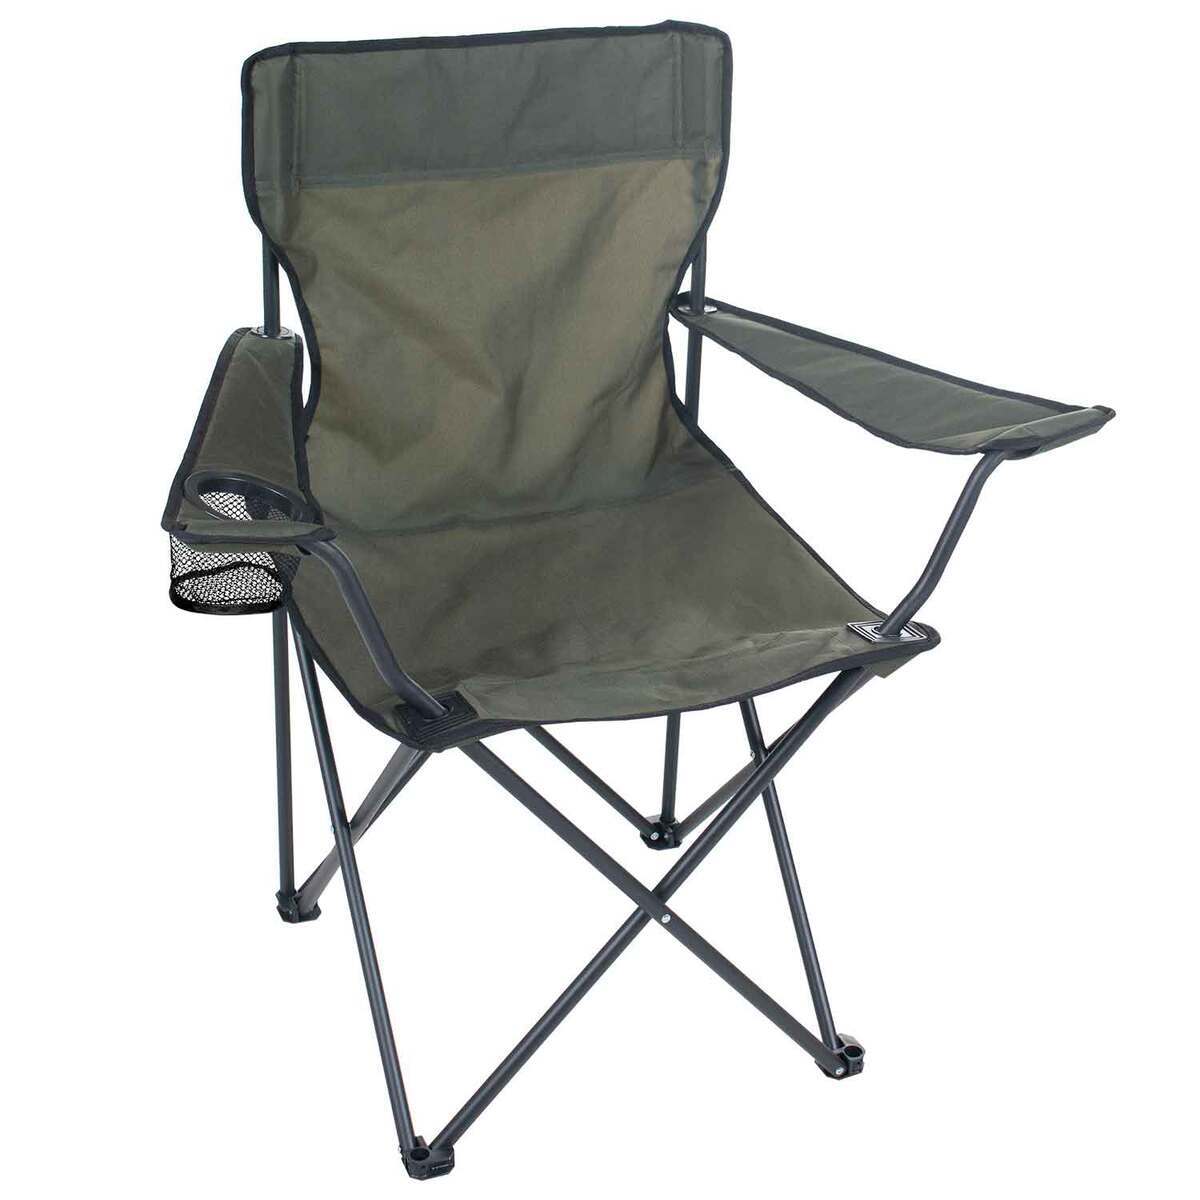 Kings River Classic Camp Chair - Green by Sportsman's Warehouse